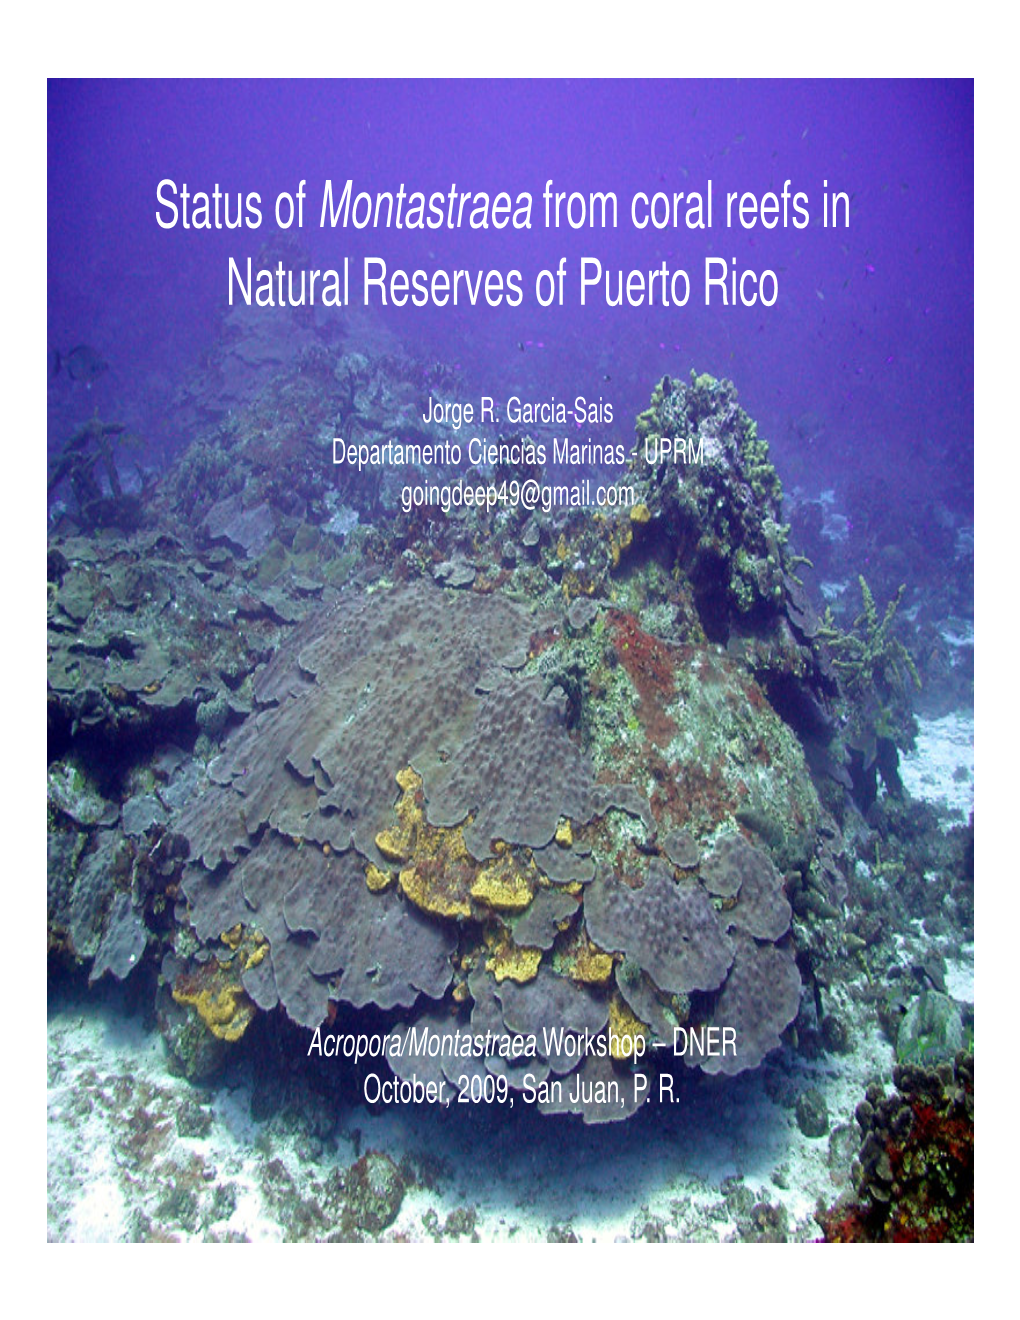 Status of Montastraea from Coral Reefs in Natural Reserves of Puerto Rico